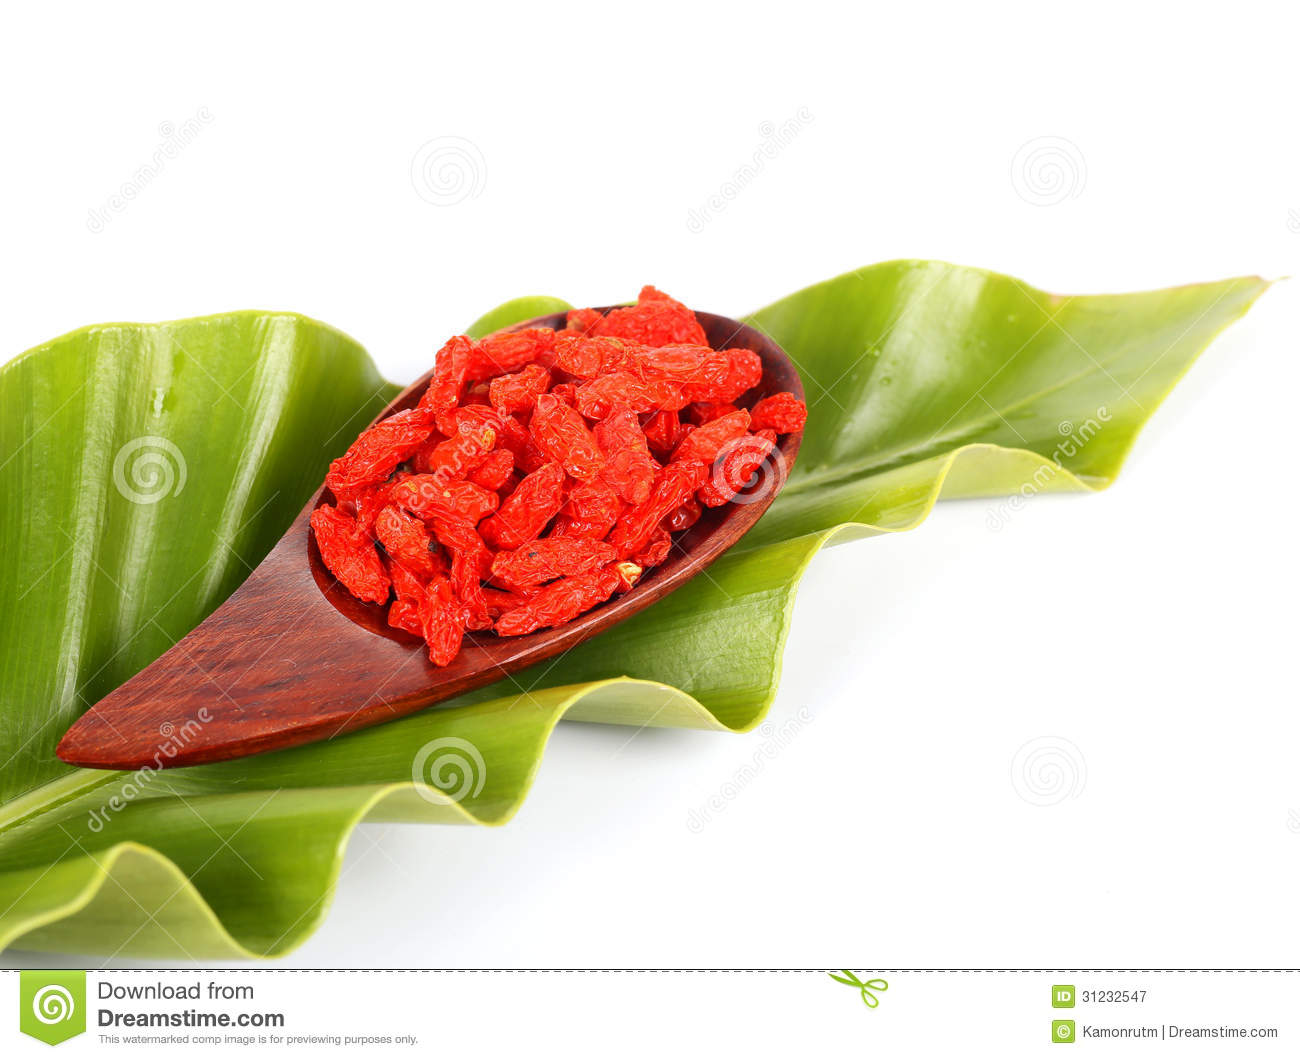 Wooden Tablespoon Of Dried Goji Berries Royalty Free Stock Photography